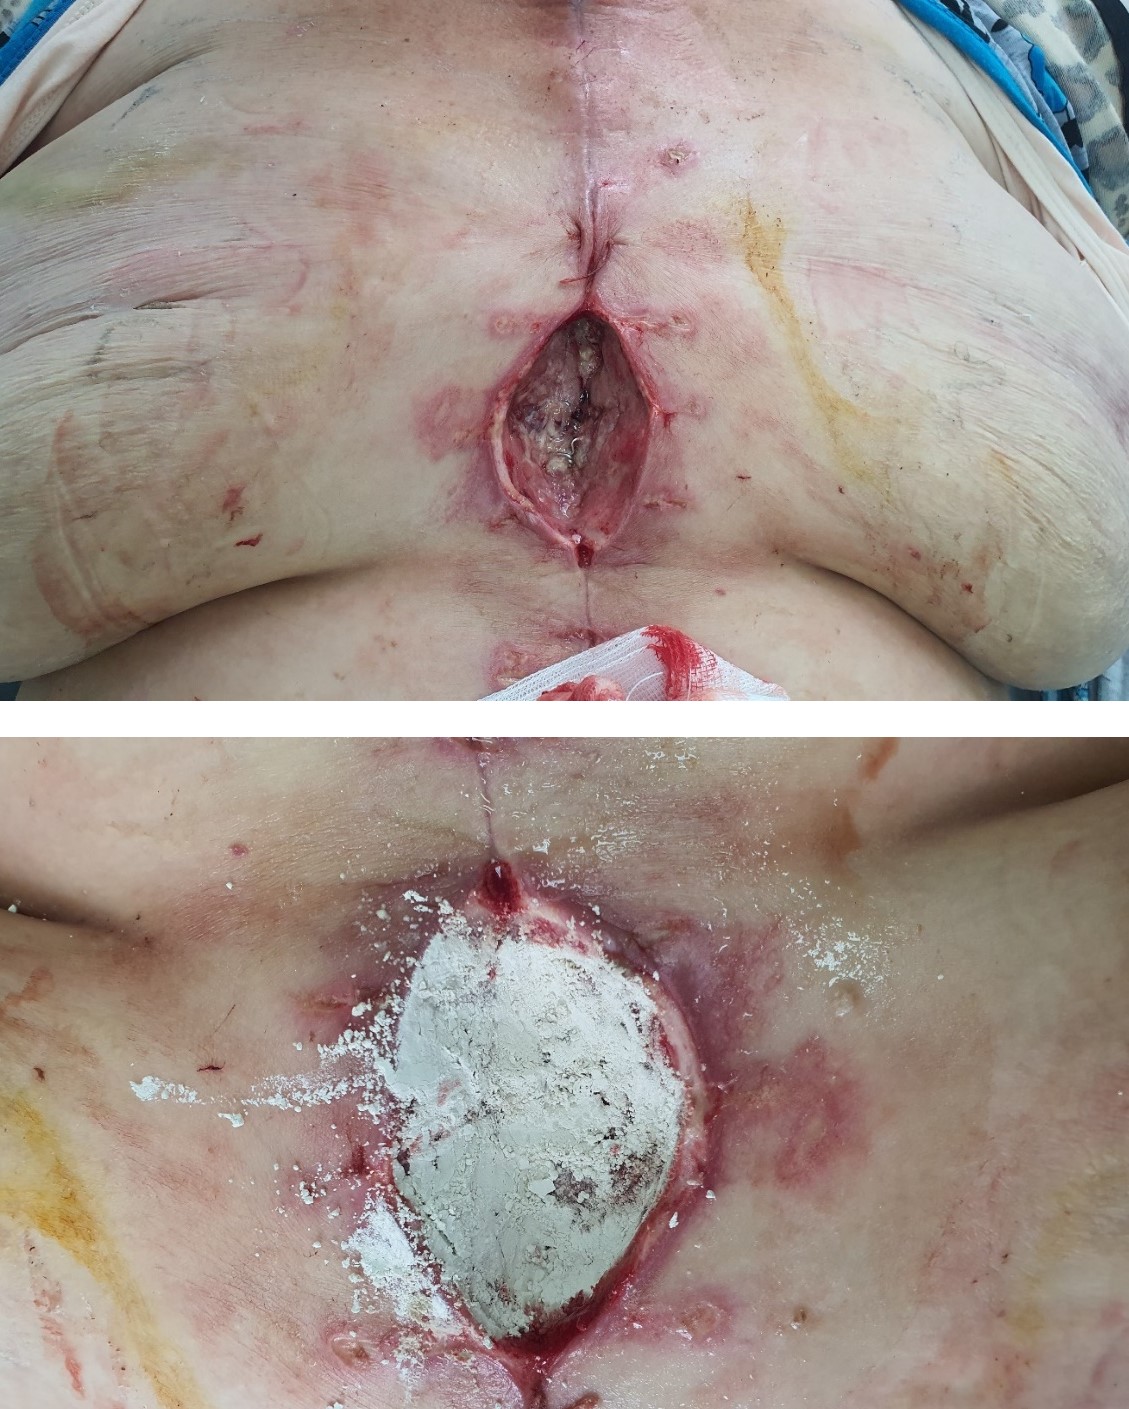 Infected chest wall wound after treatment with modified silver monmorillonite